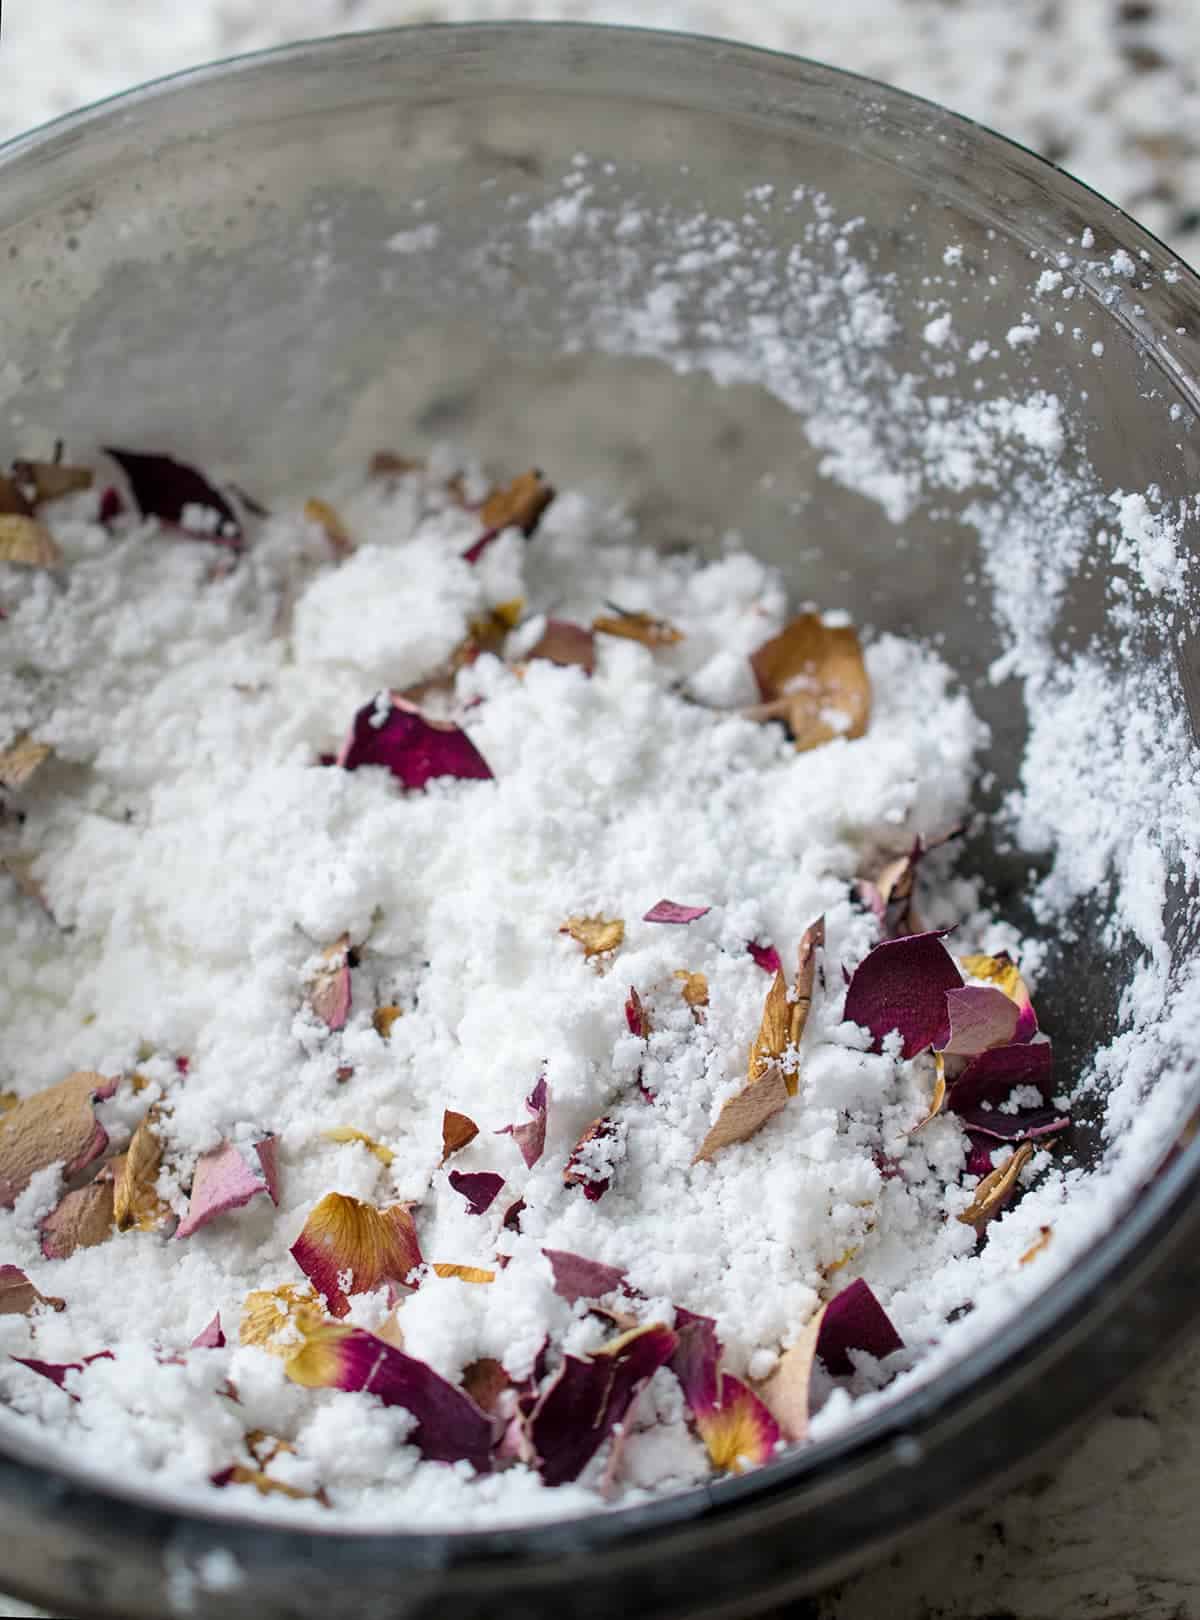 White bath bomb base mixture with added dried rose petal pieces in glass bowl